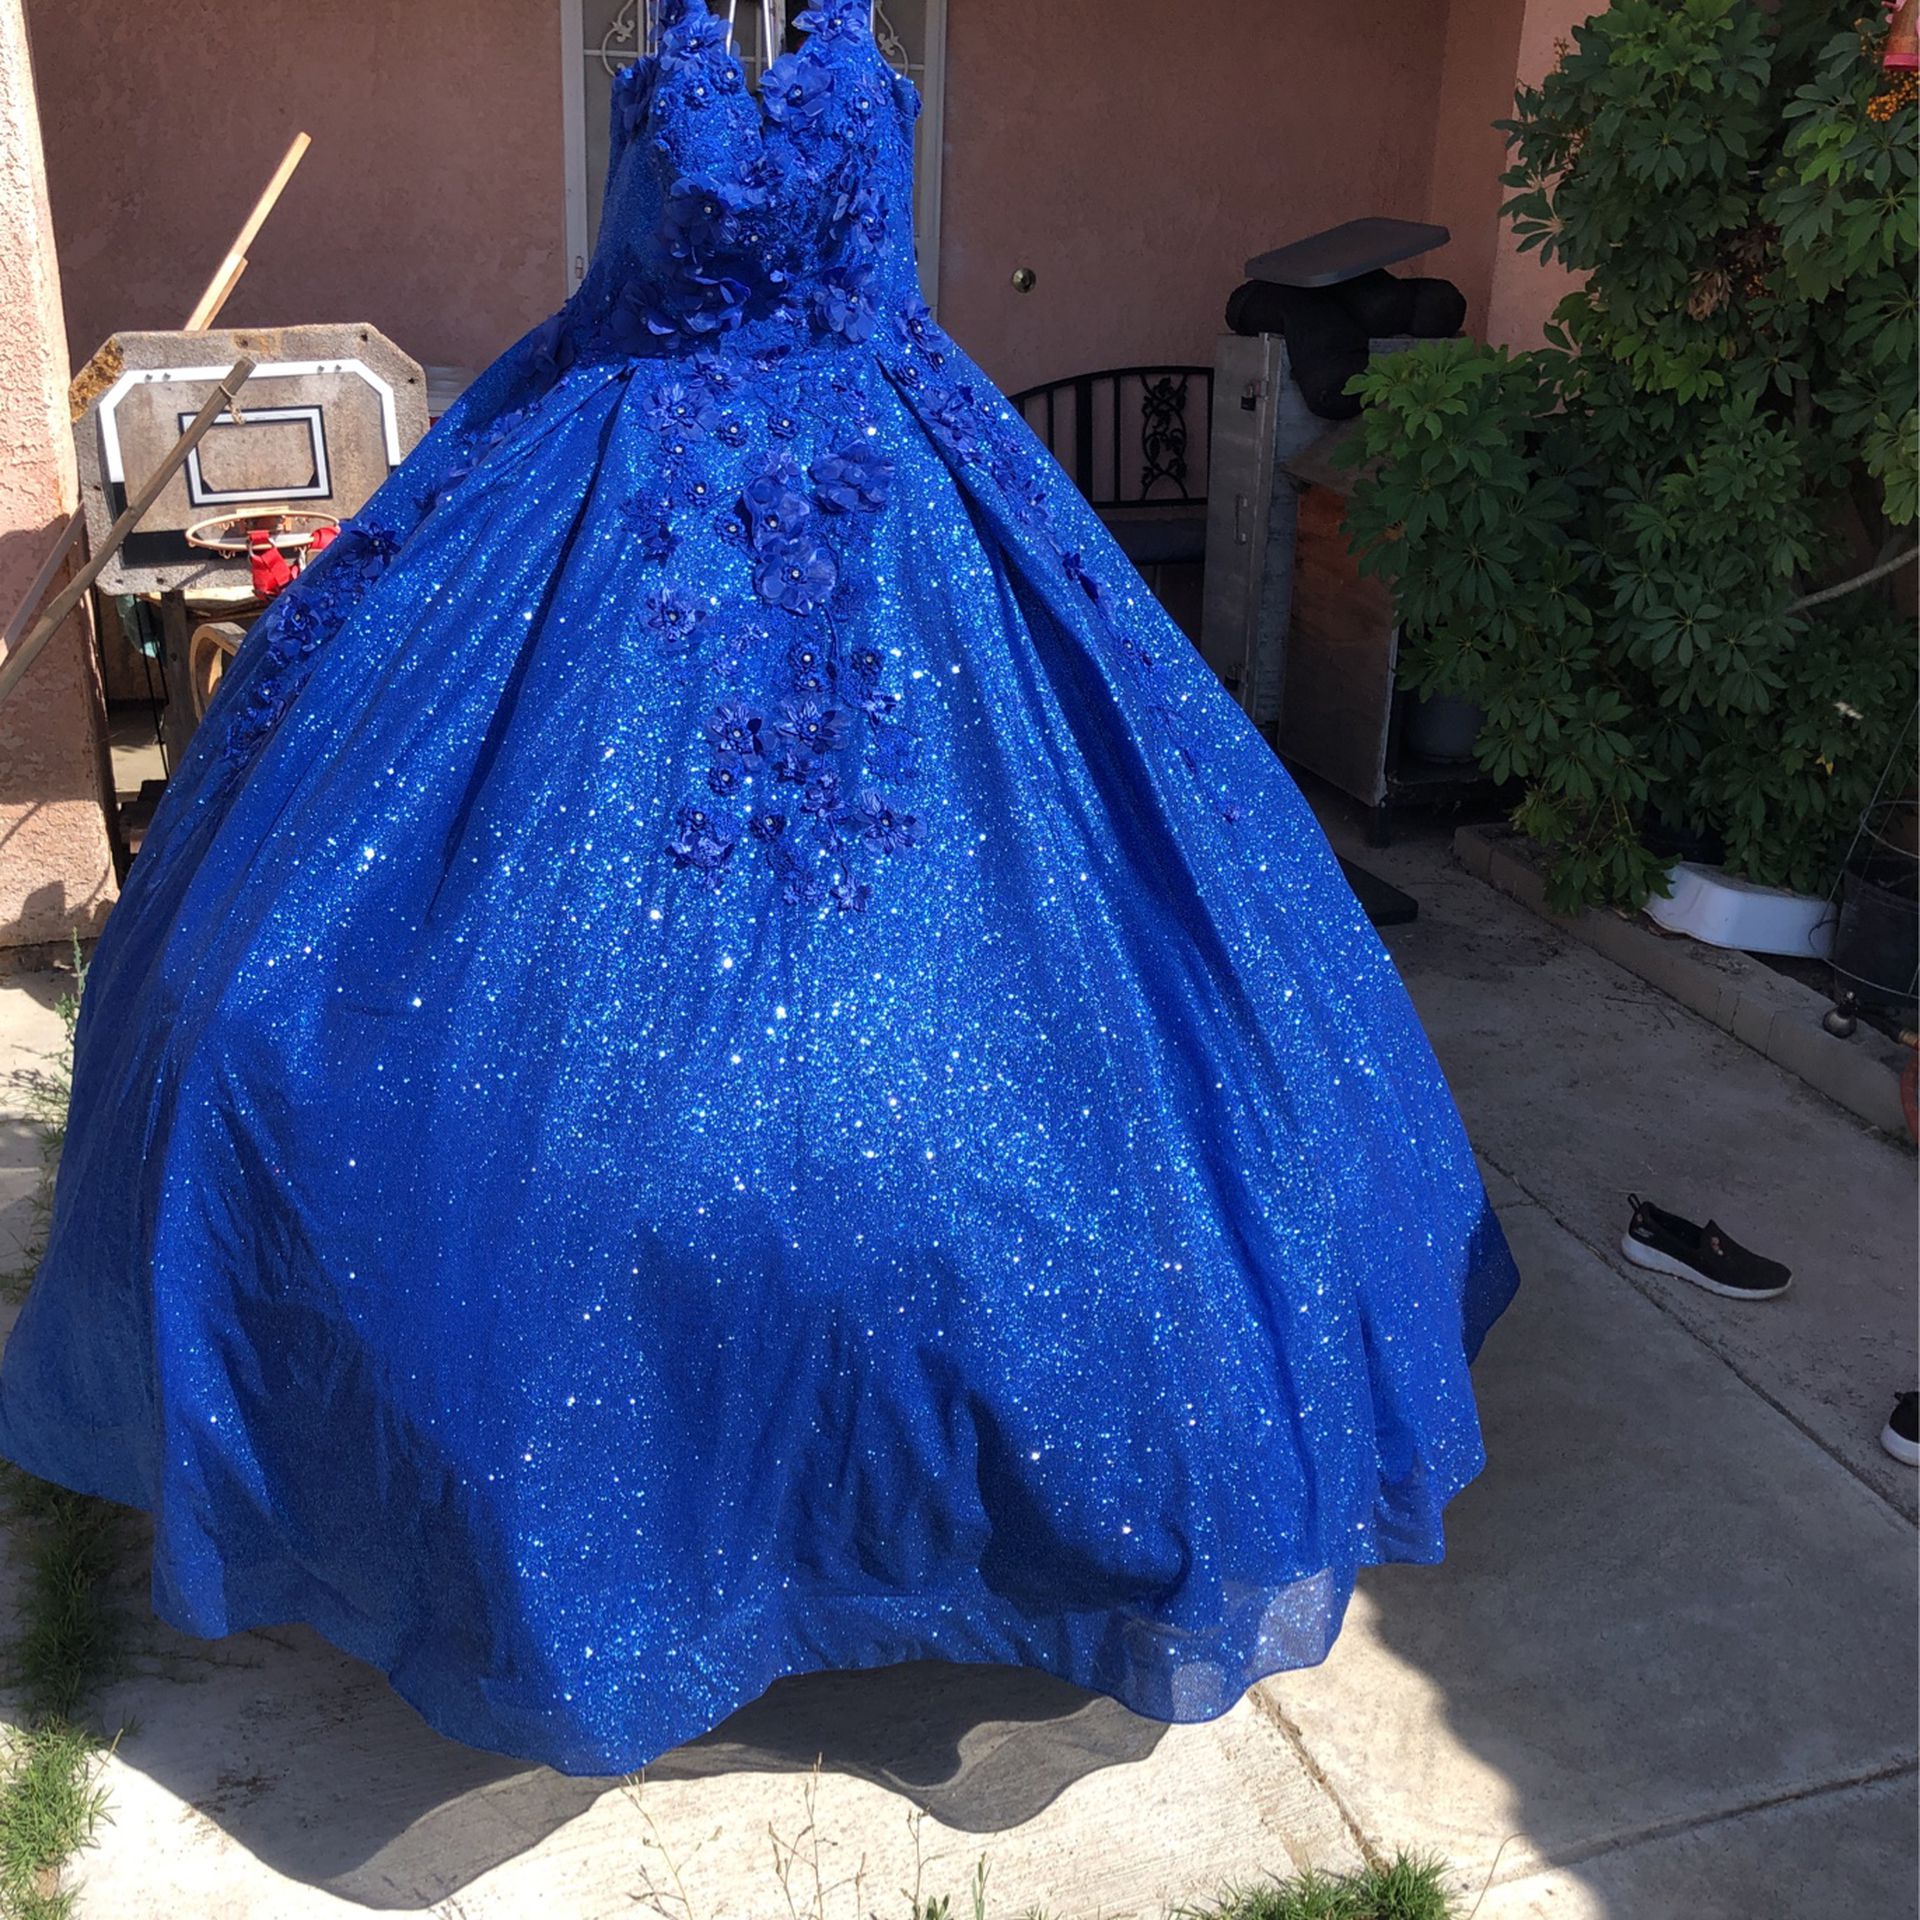 15 Quinceanera Dress 18 Debut Dress Royal Blue With Flowers on 3XL Also Includes Petty  Asking $800 Only Used once Includes Crown and Bouquet 